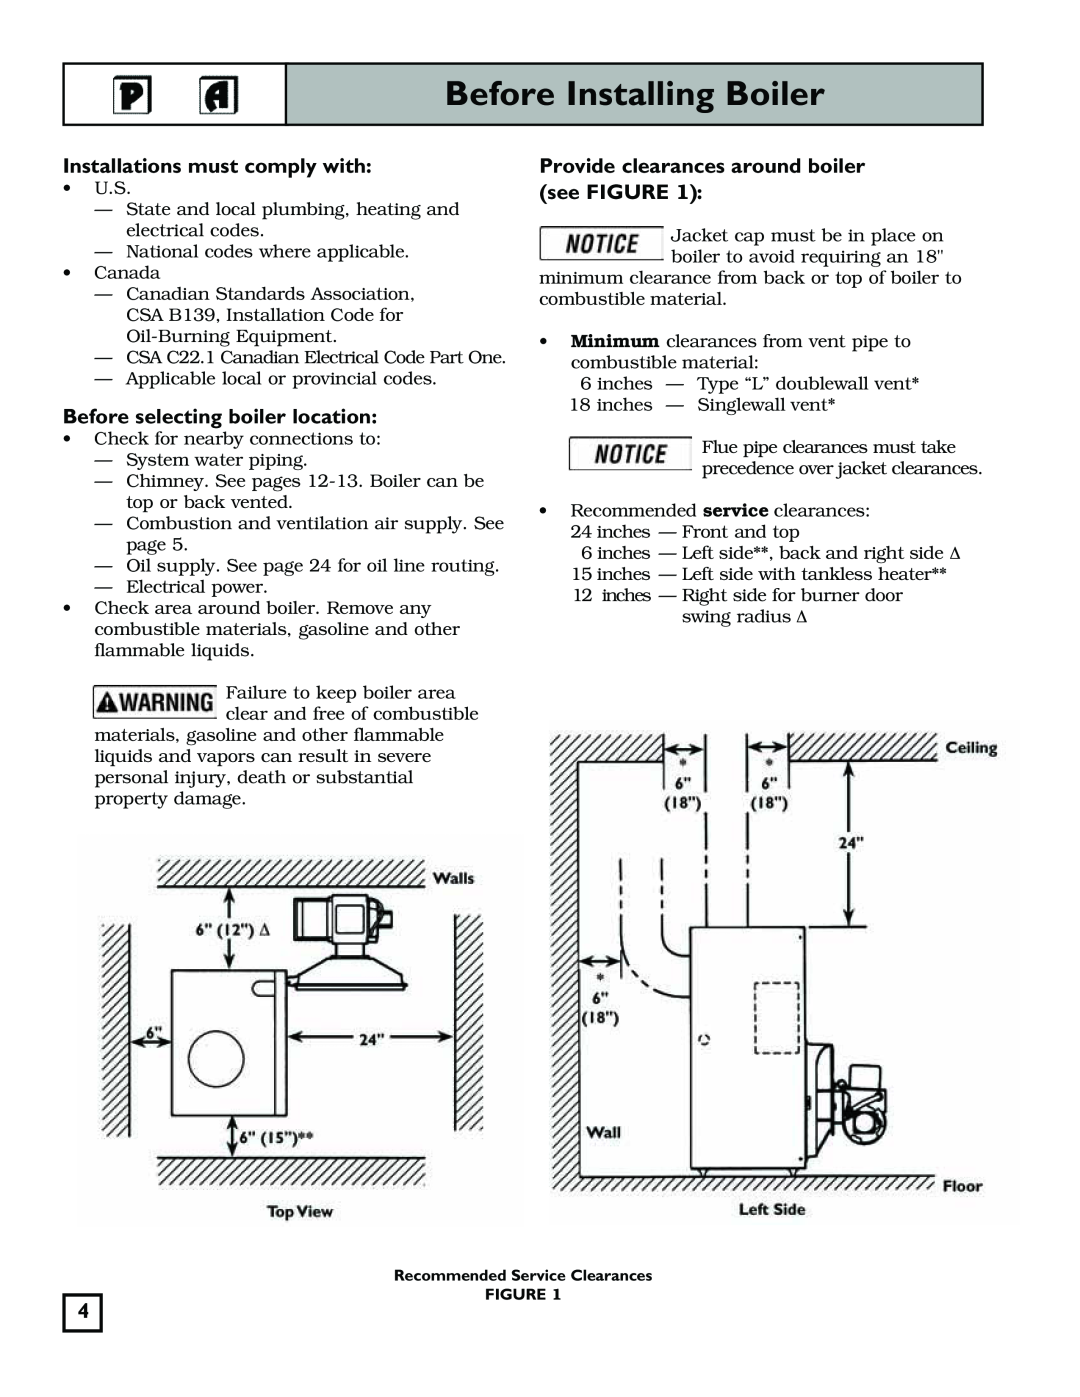 Weil-McLain 550-141-829/1201 Before Installing Boiler, Installations must comply with, Before selecting boiler location 